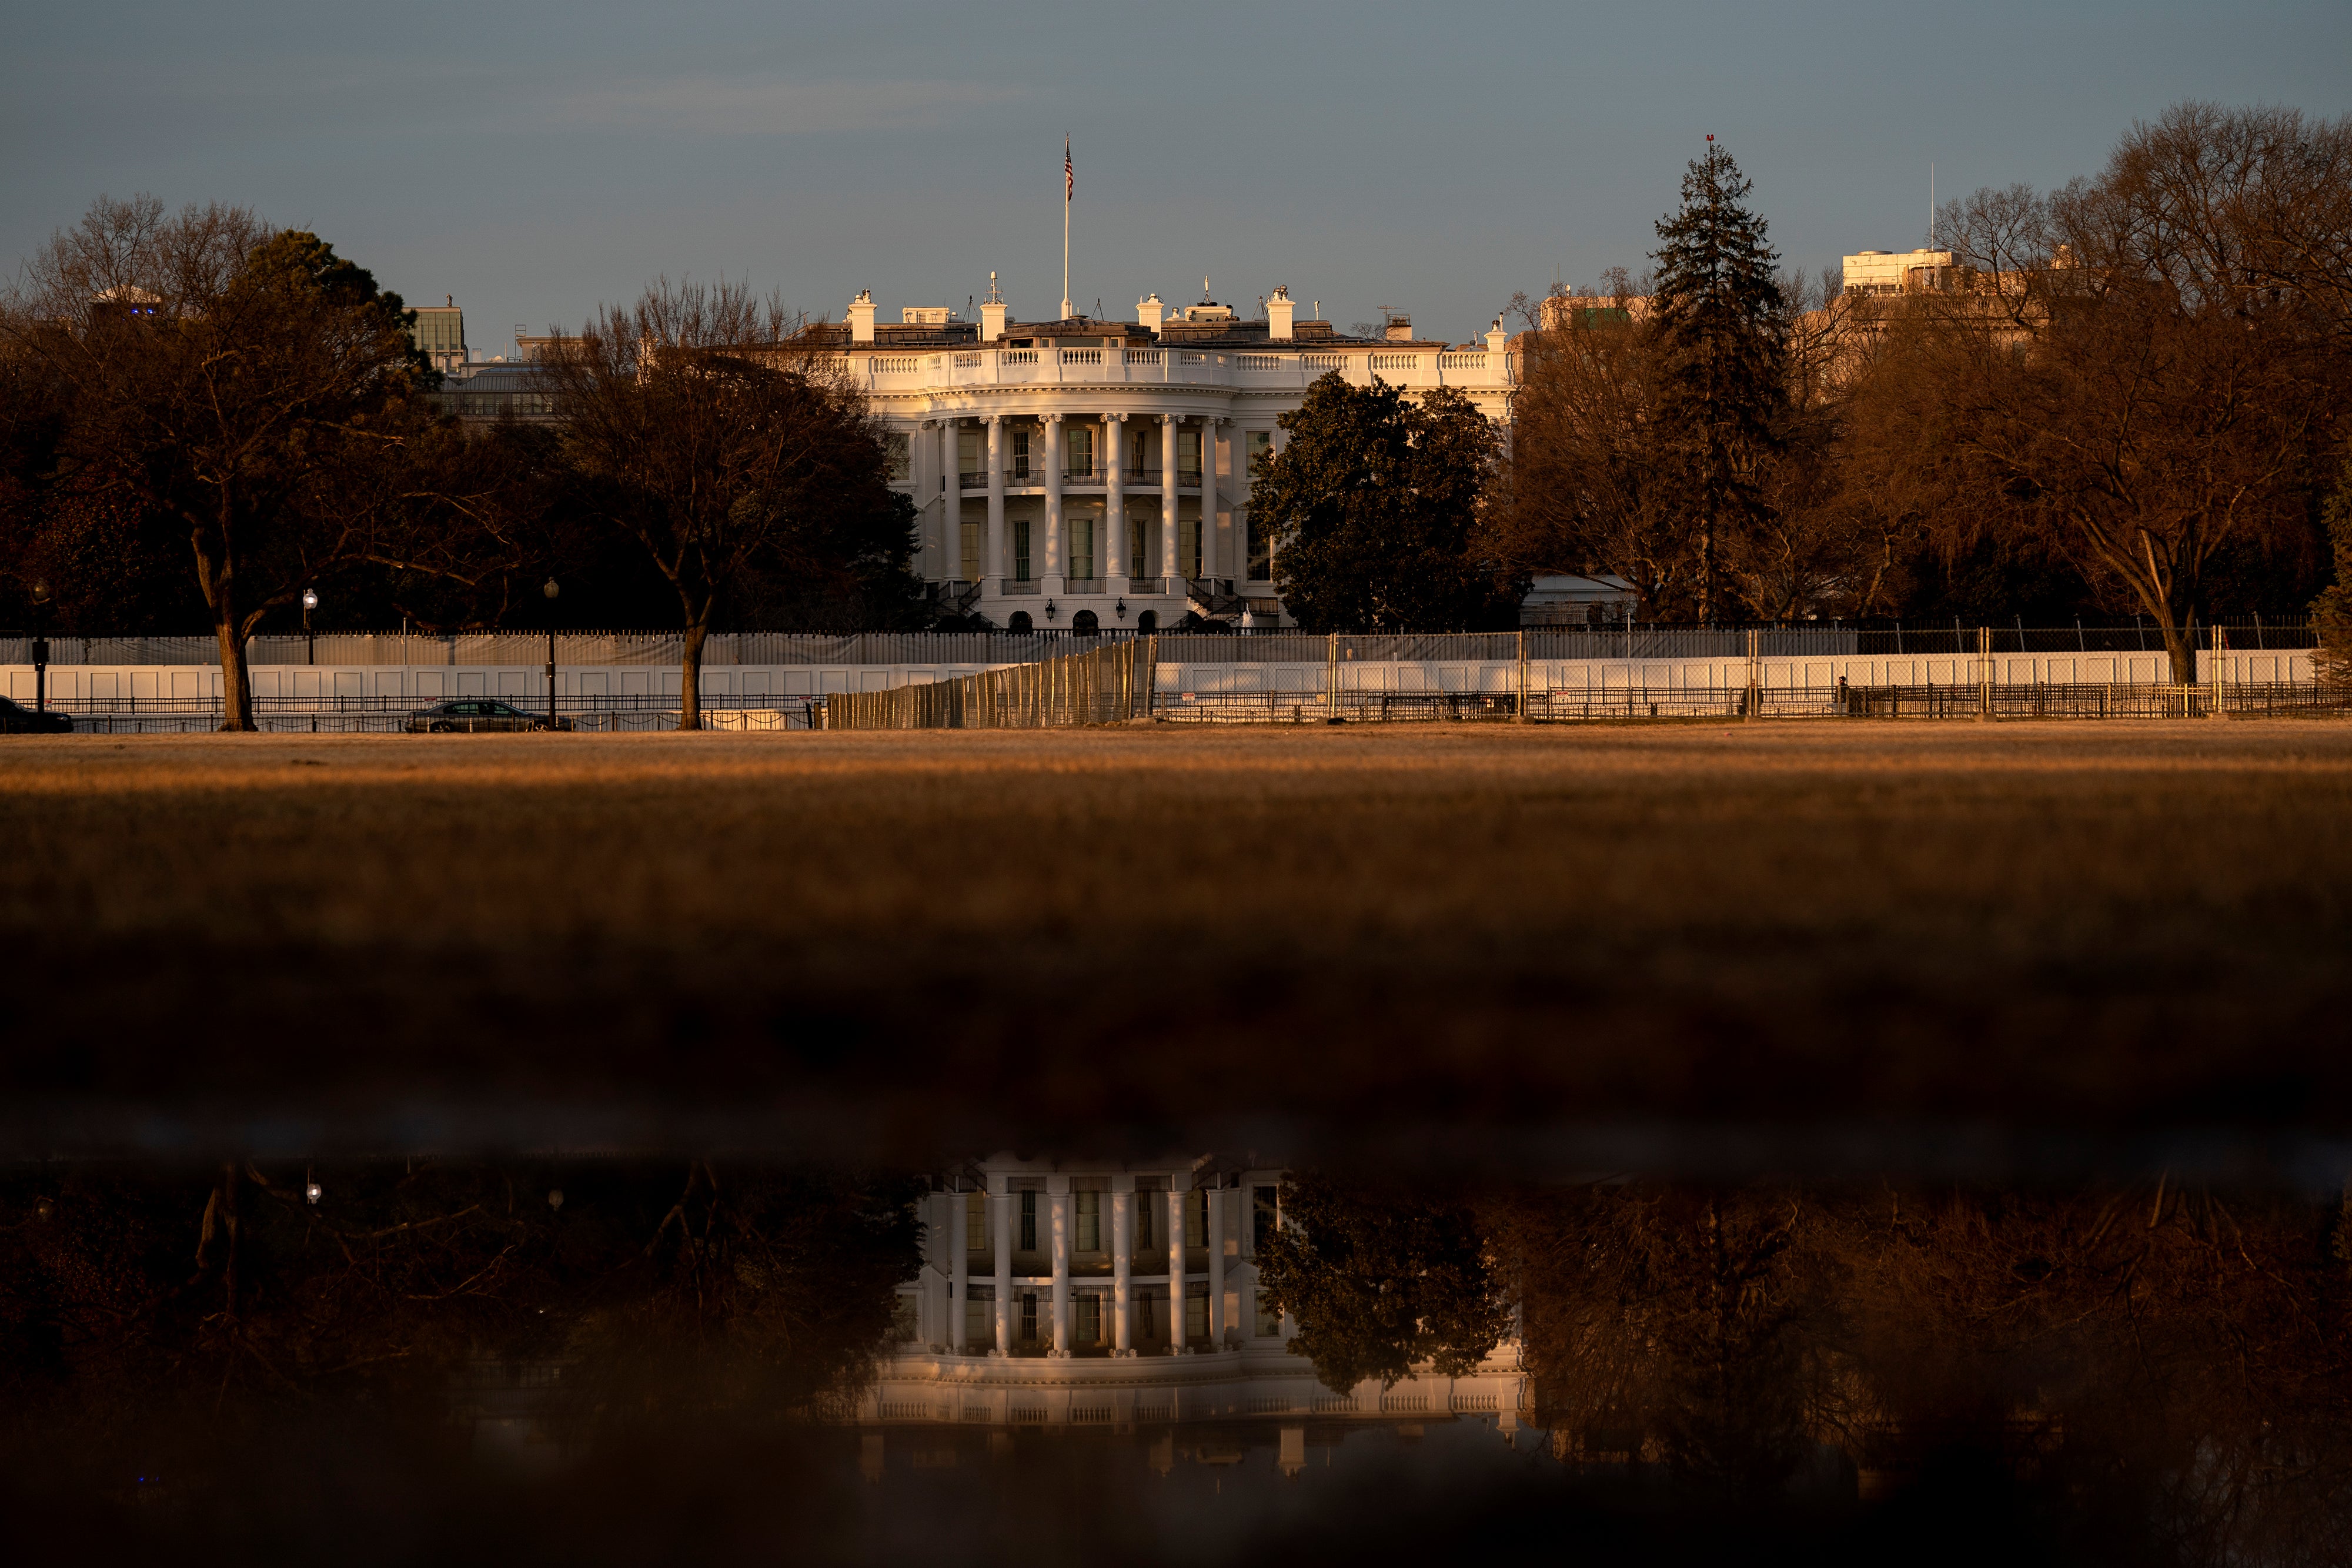 The White House now sits behind layers of fencing following the storming of the US Capitol on 6 January